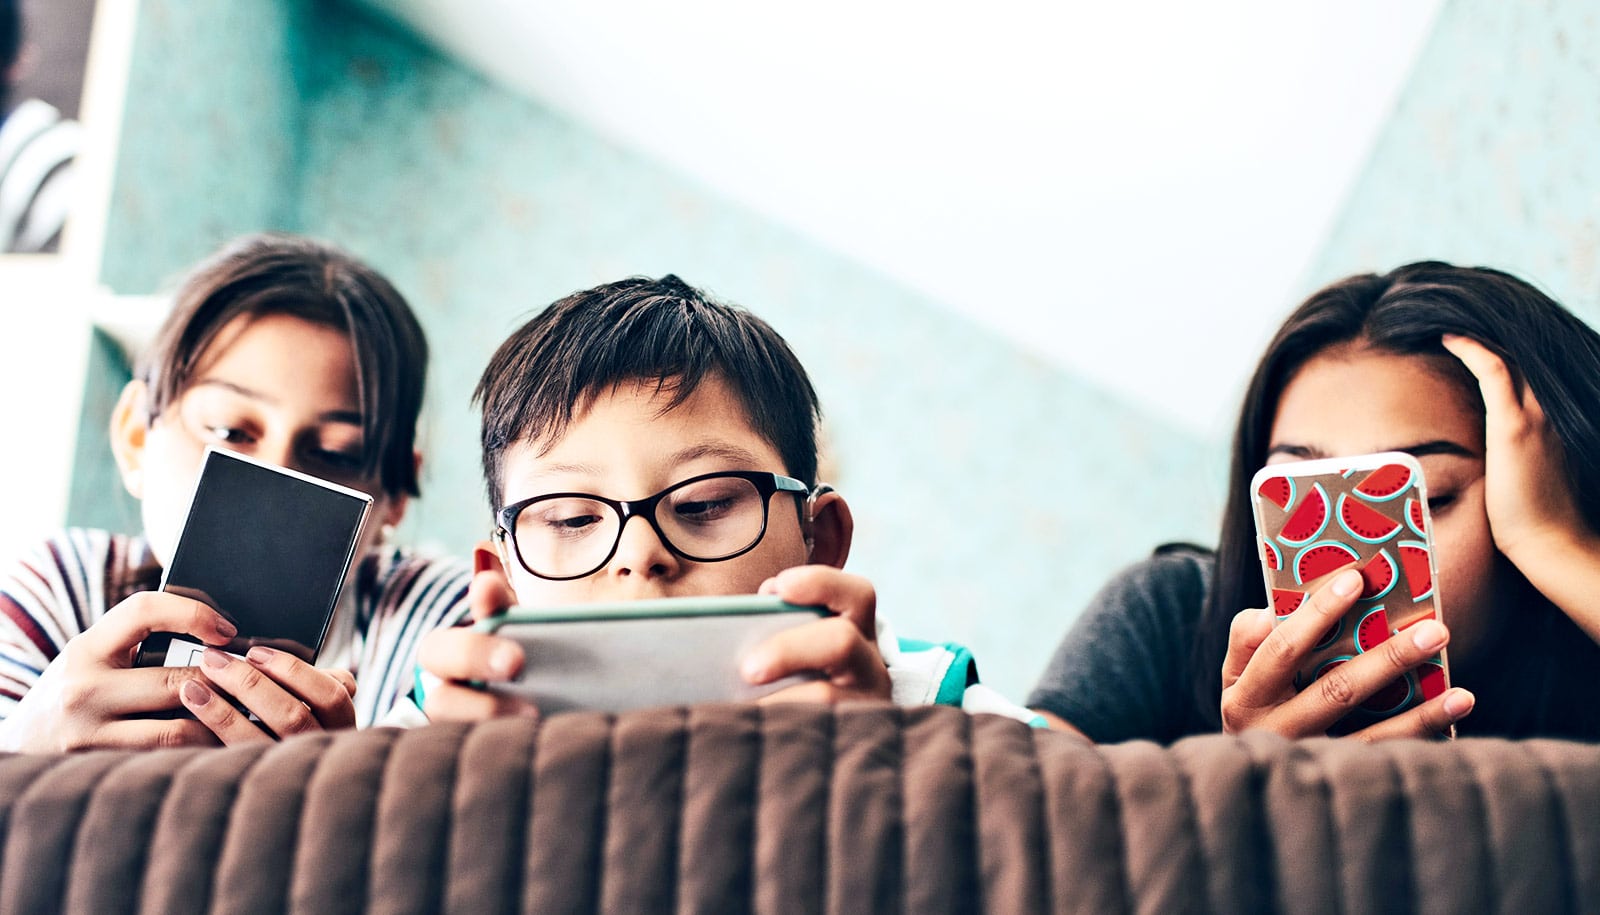 There's no 'golden rule' for when kids should get their first phone